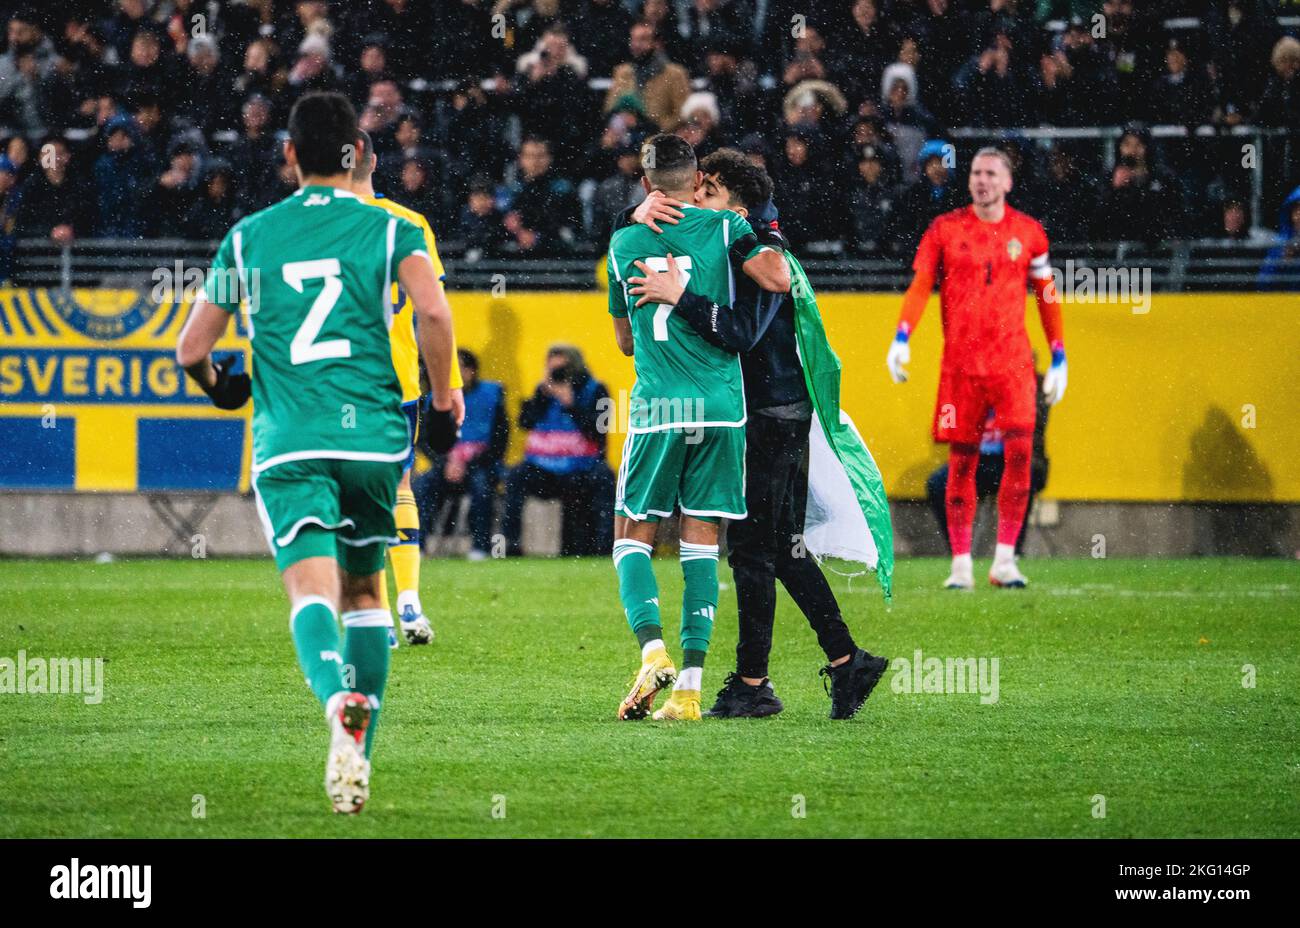 Malmoe, Sweden. 19th, November 2022. Riyad Mahrez (7) of Algeria seen with a fan who gained access to the pitch during the football friendly between Sweden and Algeria at Eleda Stadion in Malmoe. (Photo credit: Gonzales Photo - Joe Miller). Stock Photo